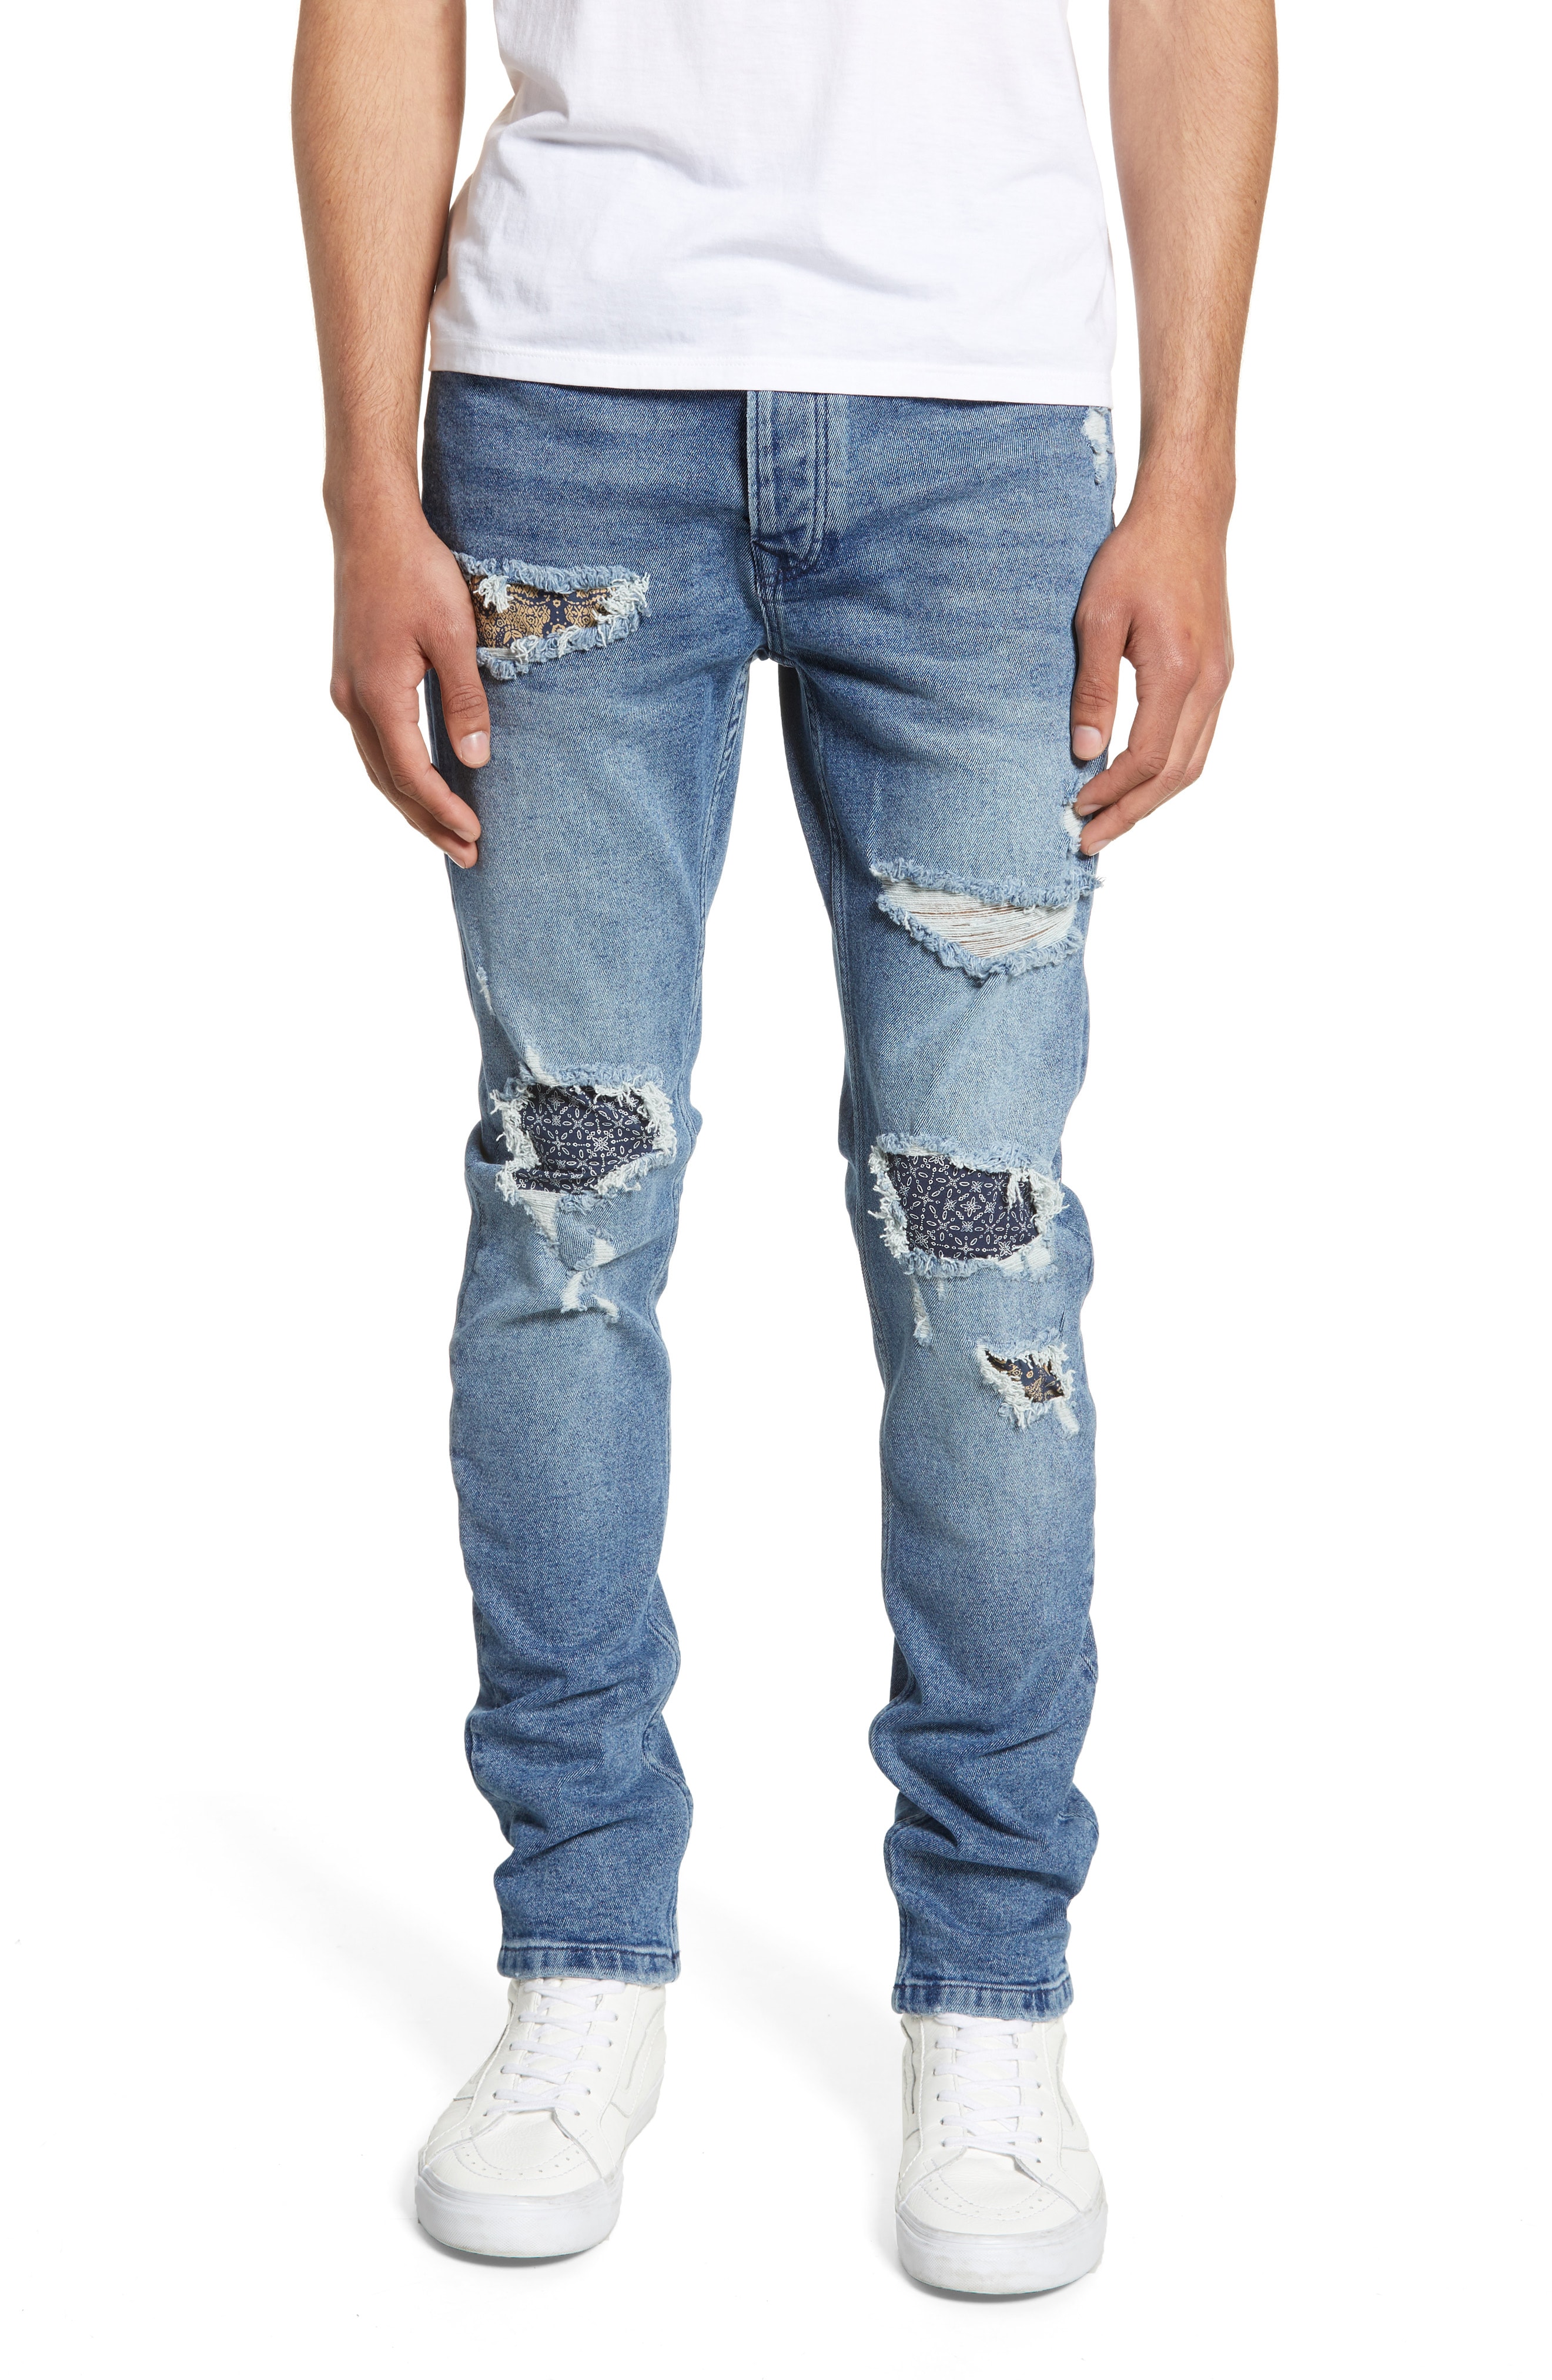 Ripped Jeans Men